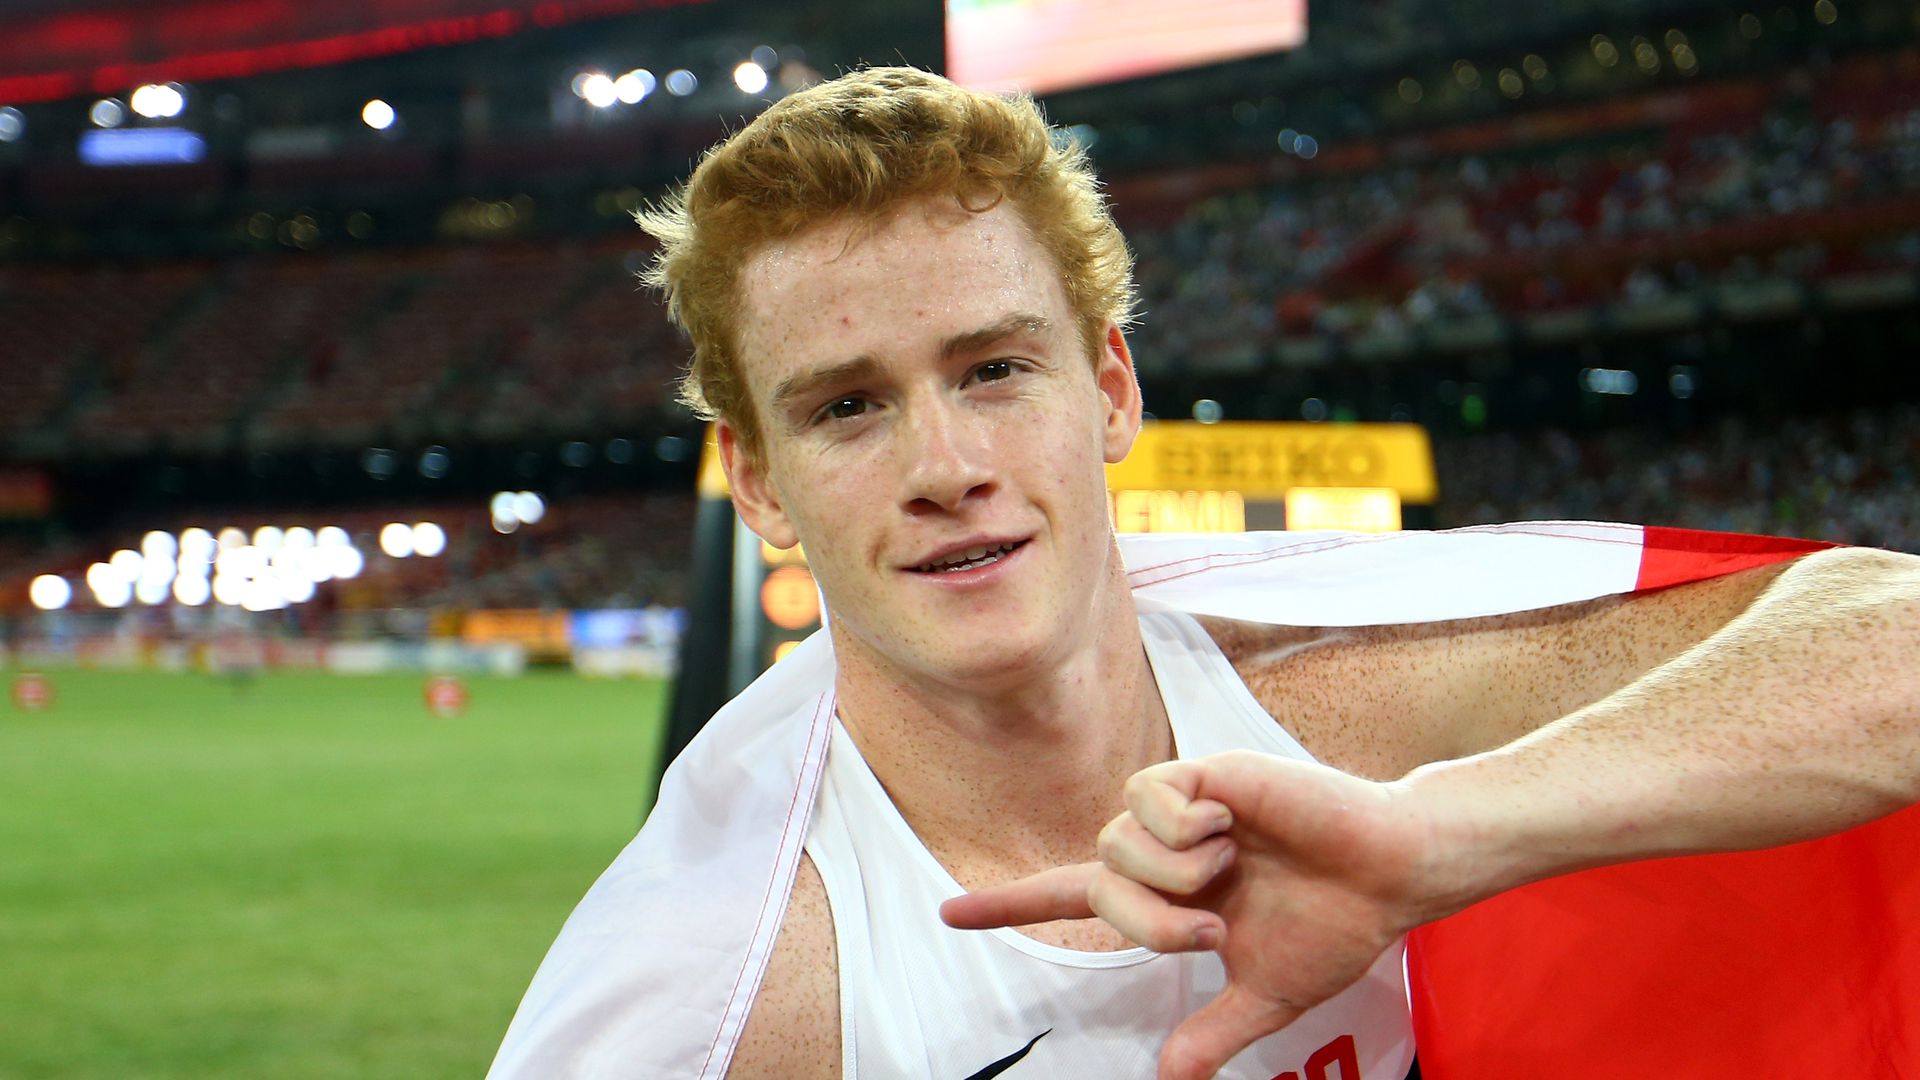 shawn barber, olympian and world champion athlete who came out as gay, has died at 29